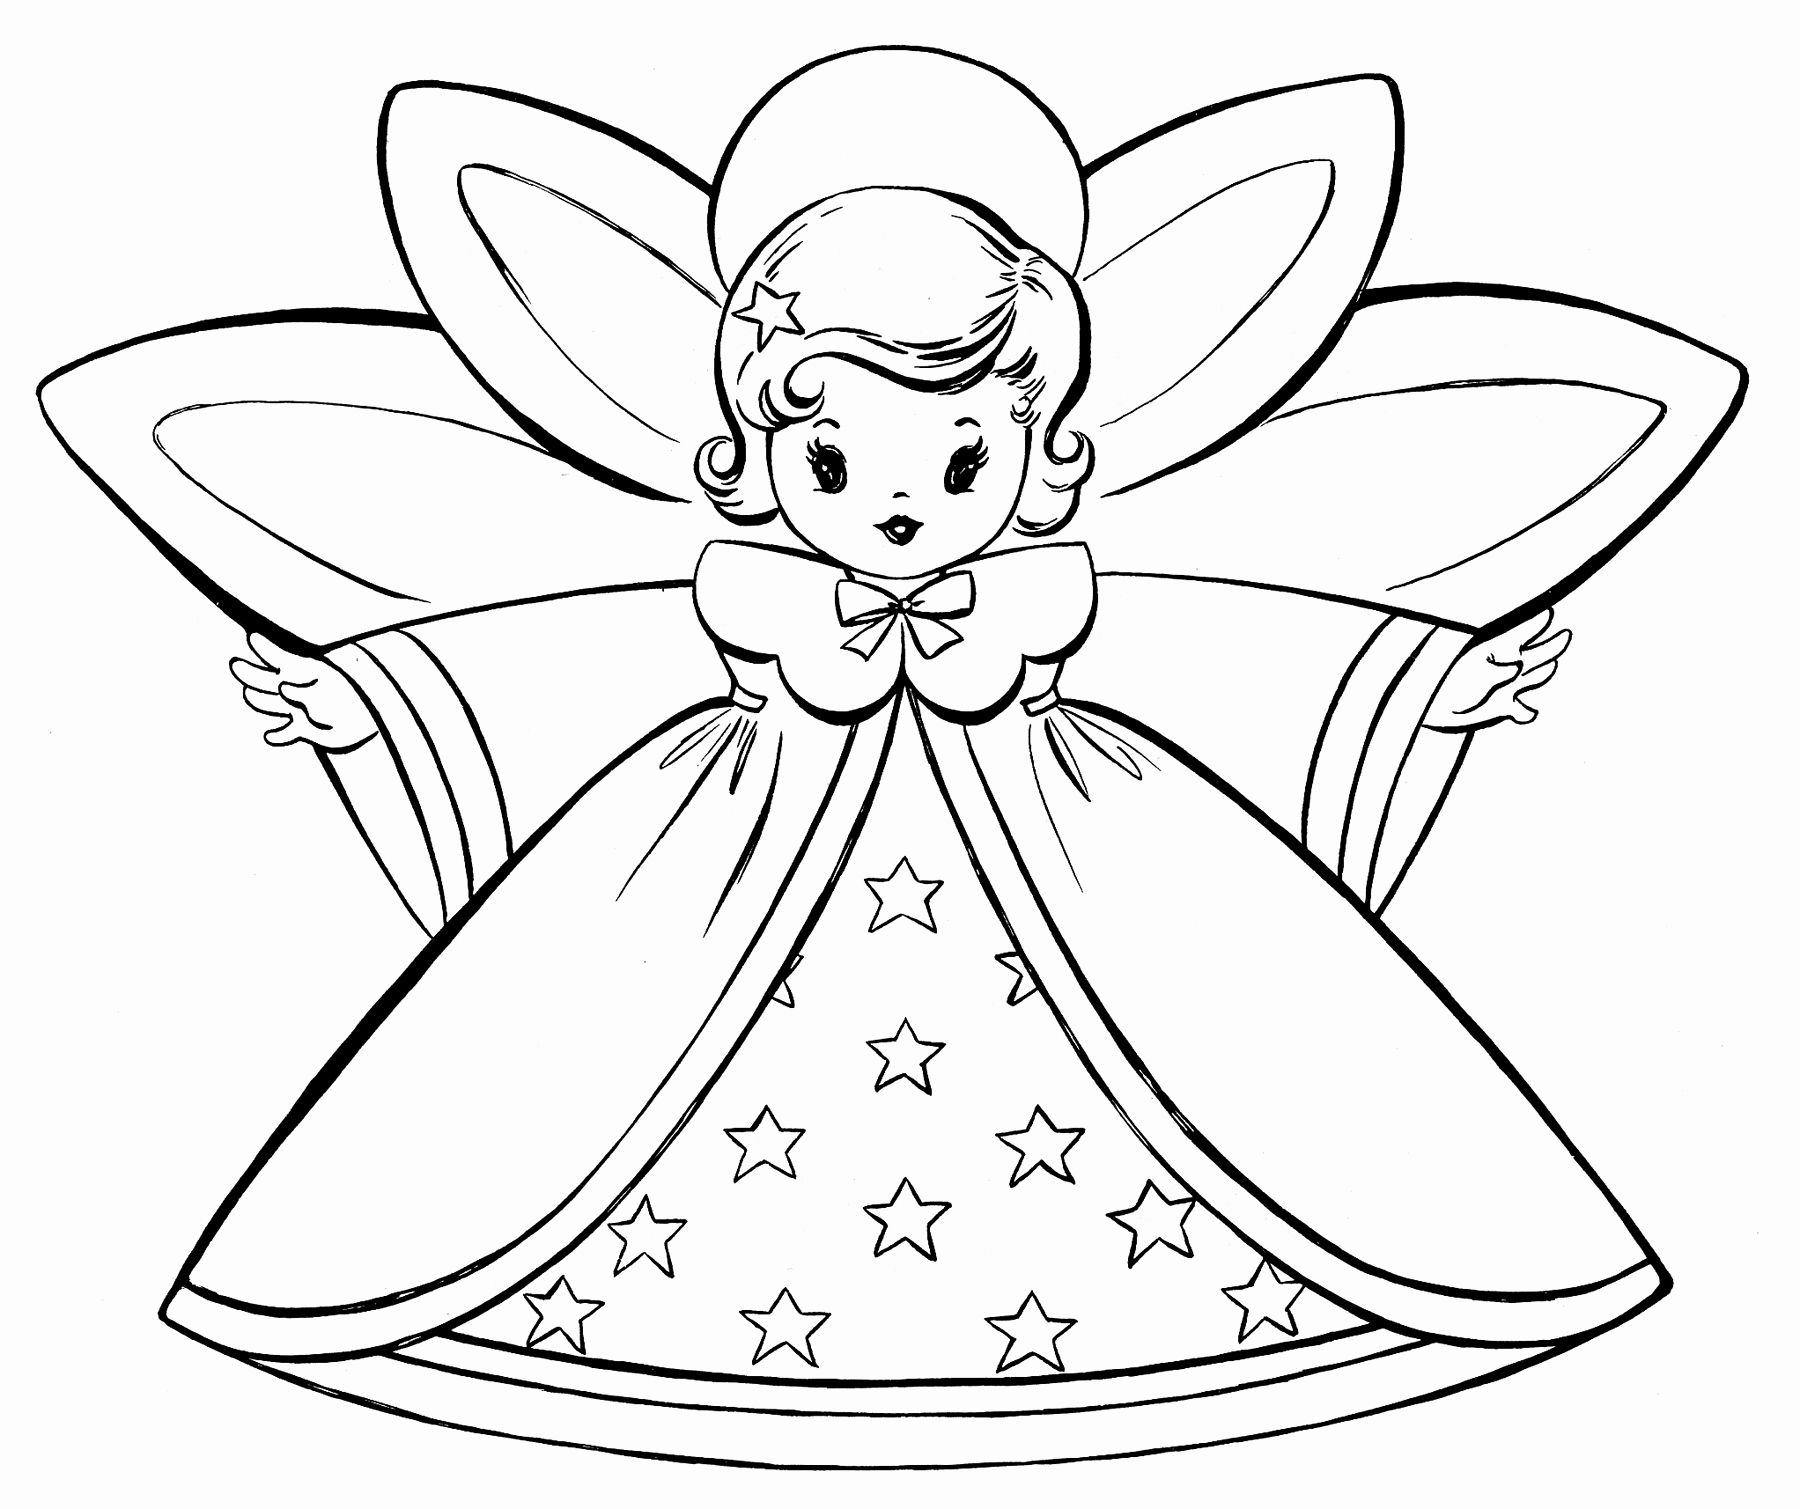 Angel Cat Coloring Pages at GetColorings.com | Free printable colorings